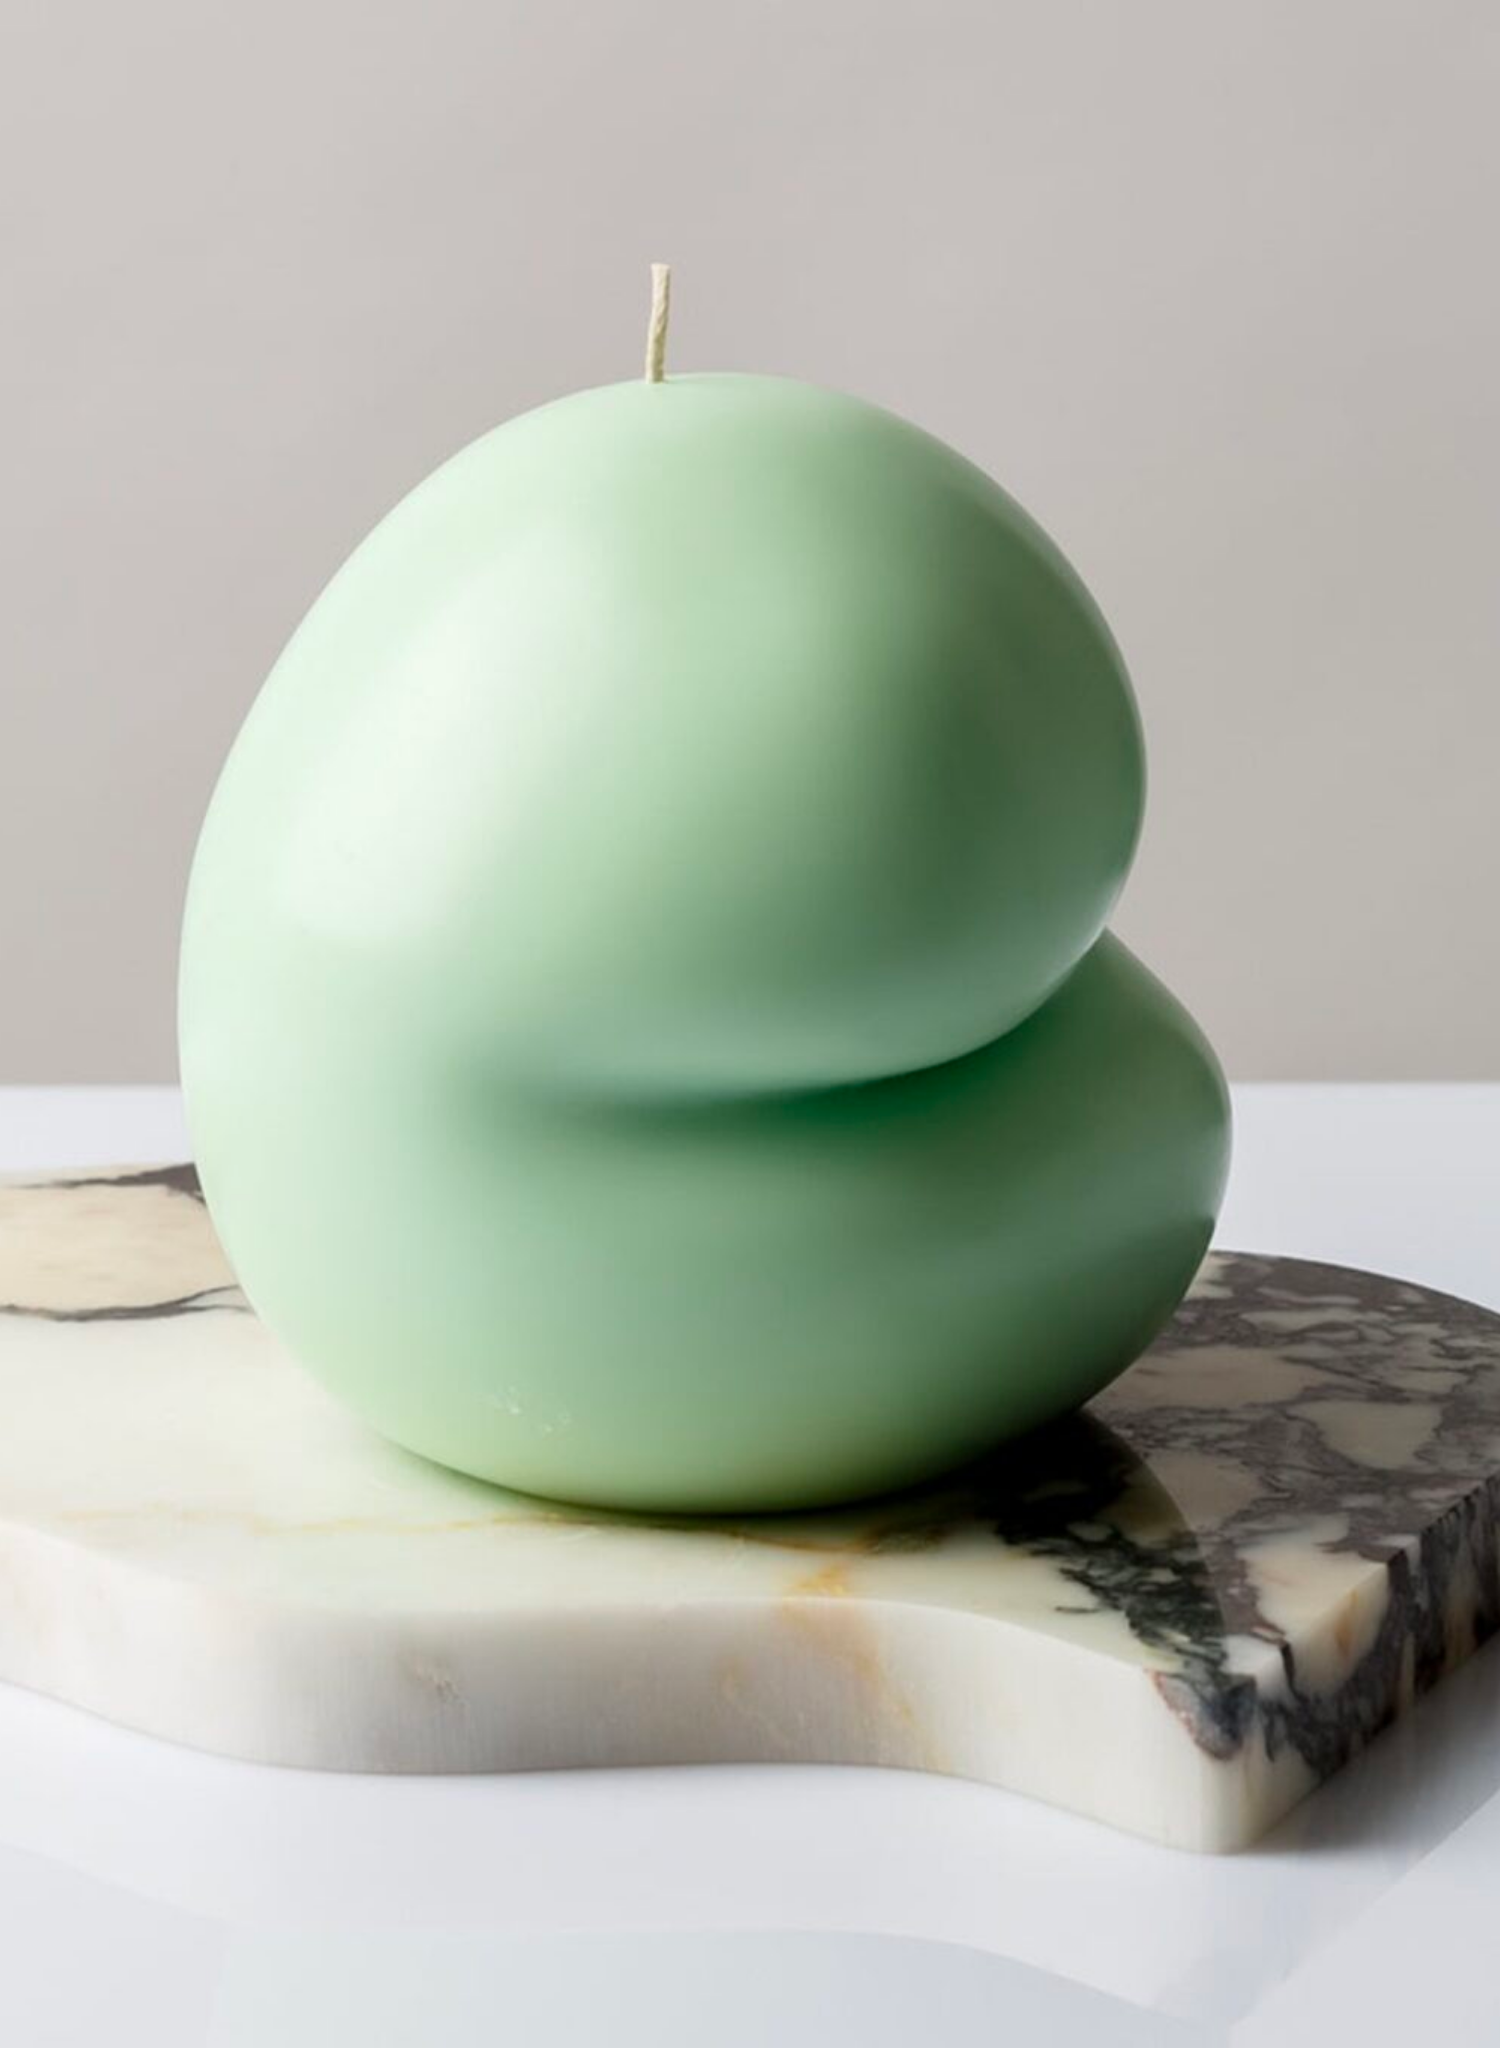 The asymmetrical Tulum Blobbies in Pistachio candle is cute and curious all at once, for seriously stylish home decor that doesn’t take itself too seriously.